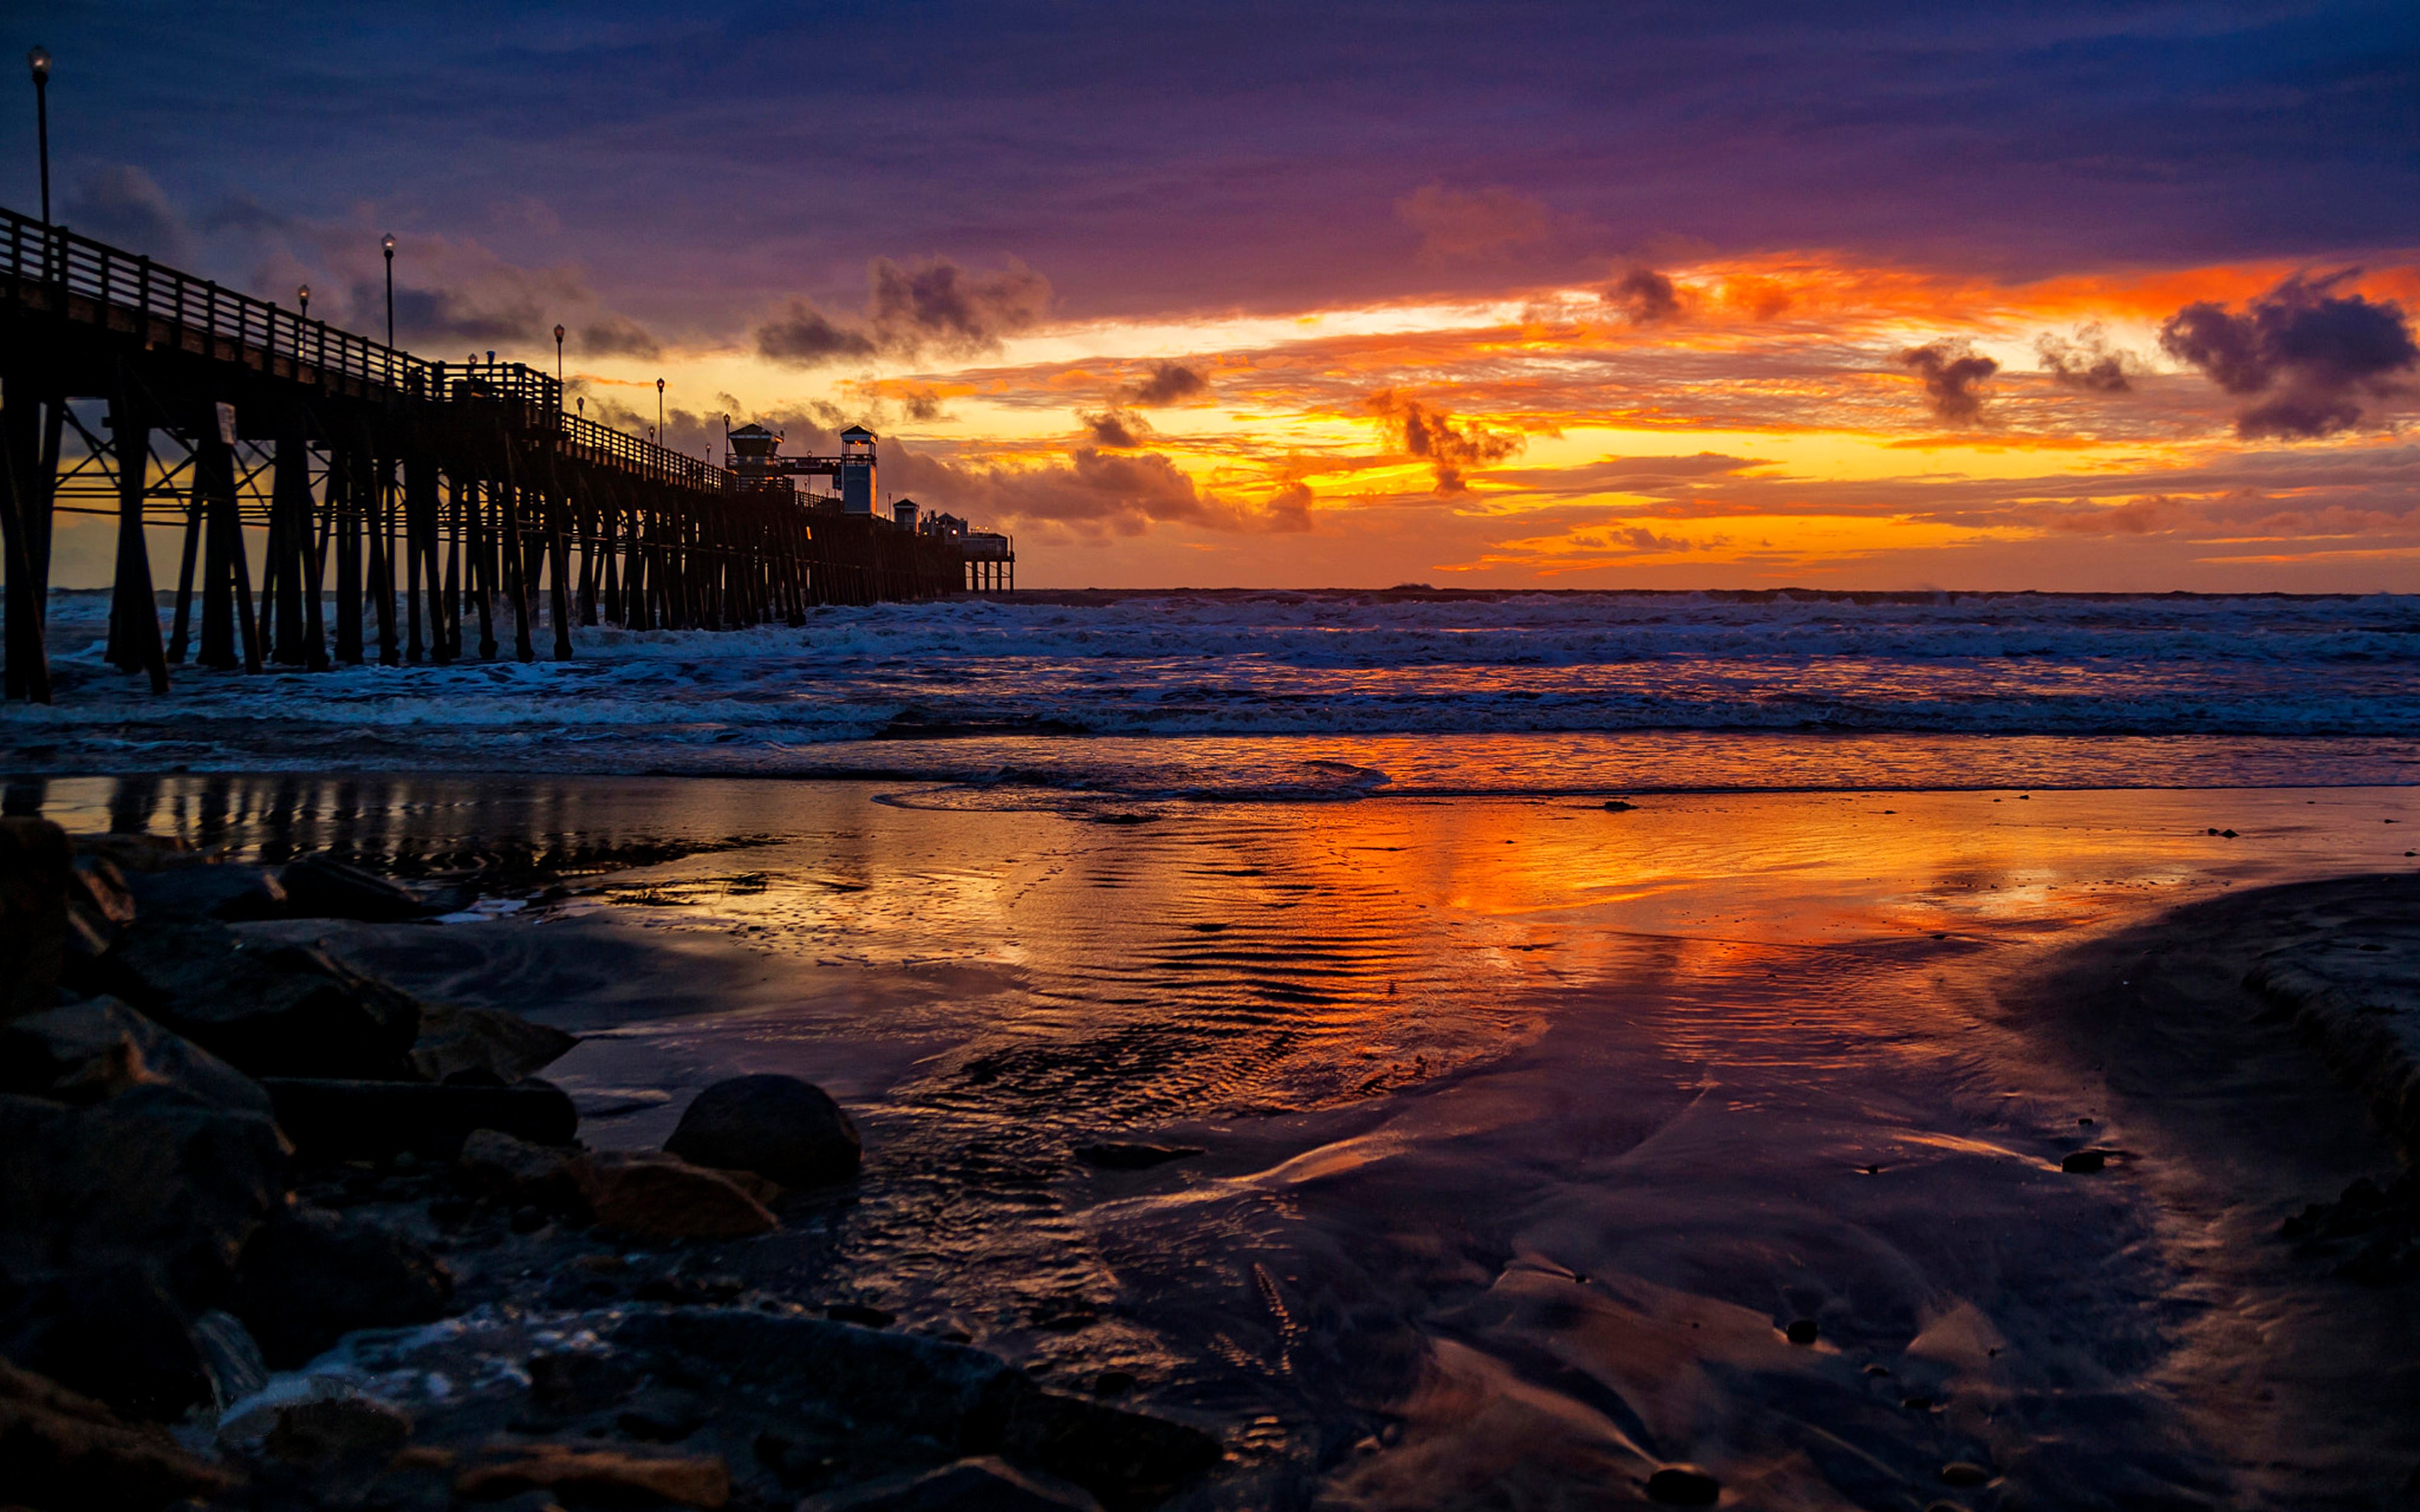 Sunset Oceanside Coastal City In California Known By Harbor